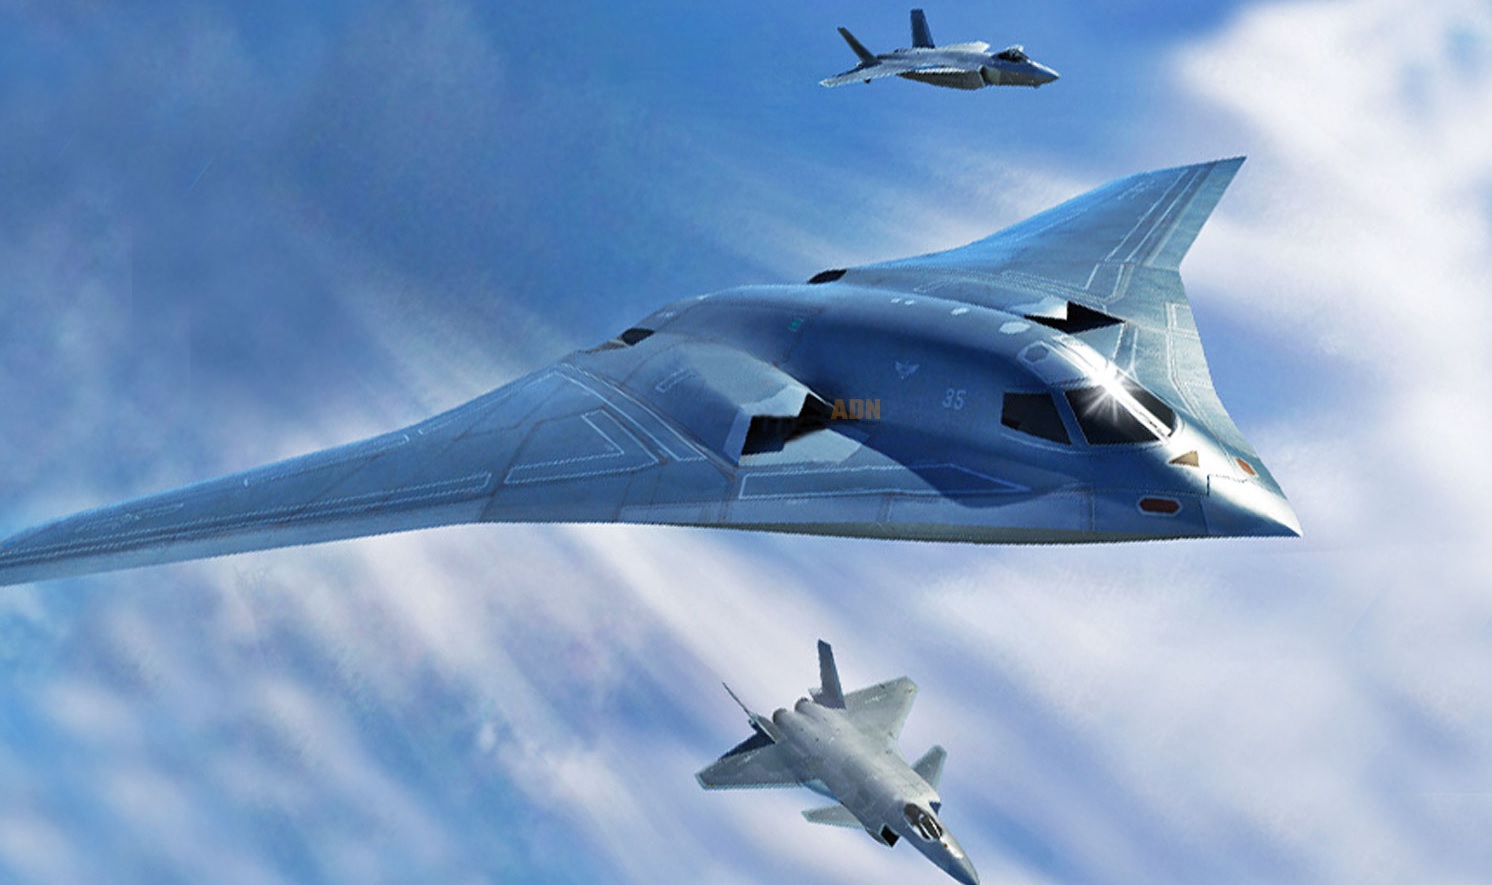 Pentagon Official Downplays Concerns Over China's H-20 Stealth Bomber